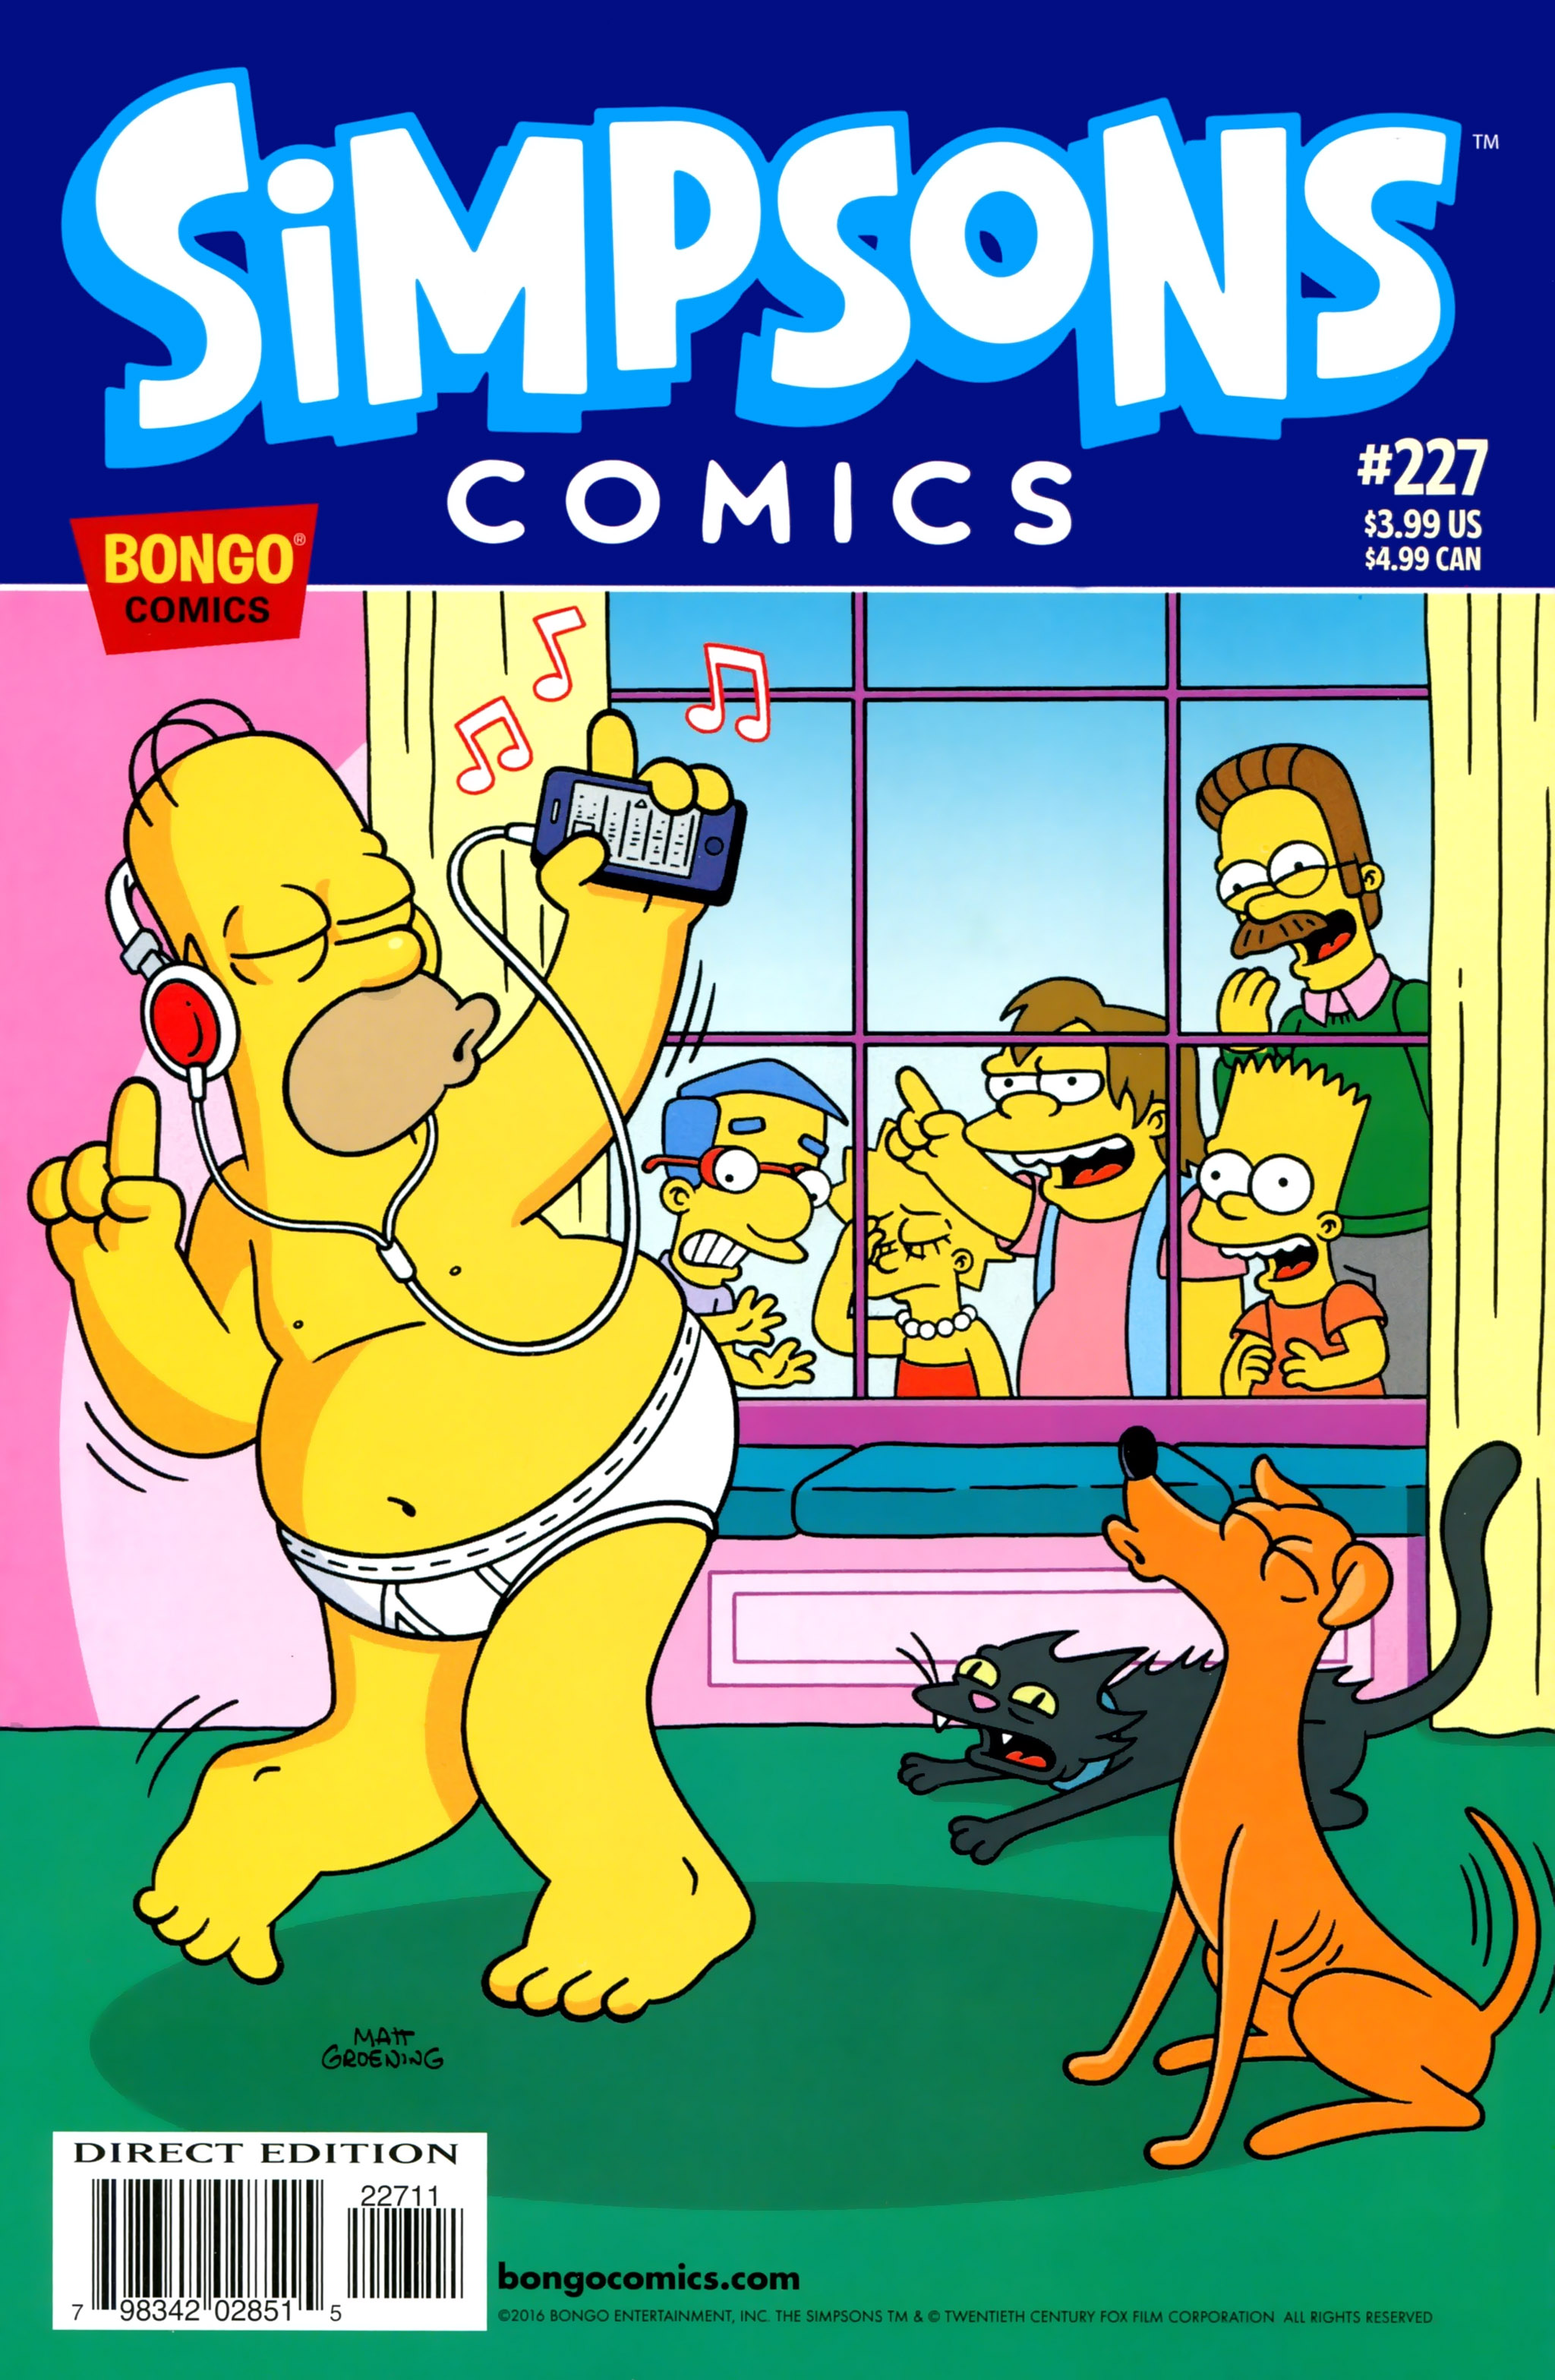 Simpsons Comics (1993-): Chapter 227 - Page 1